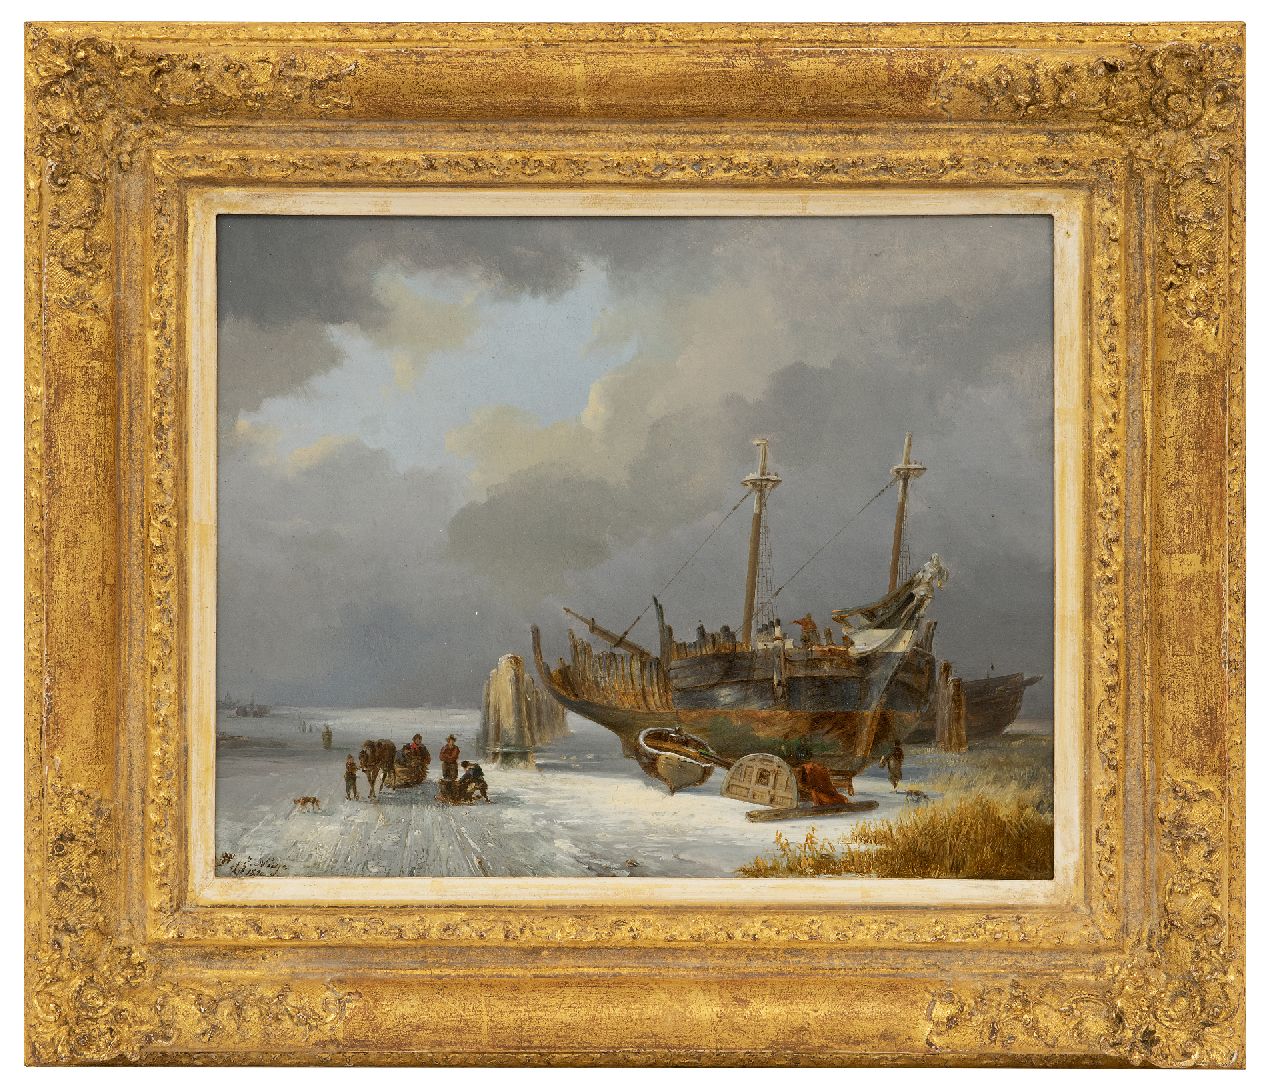 Nuijen W.J.J.  | Wijnandus Johannes Josephus 'Wijnand' Nuijen | Paintings offered for sale | Frozen landscape with figures and a shipyard, oil on panel 23.4 x 29.8 cm, signed l.l. and dated 1830